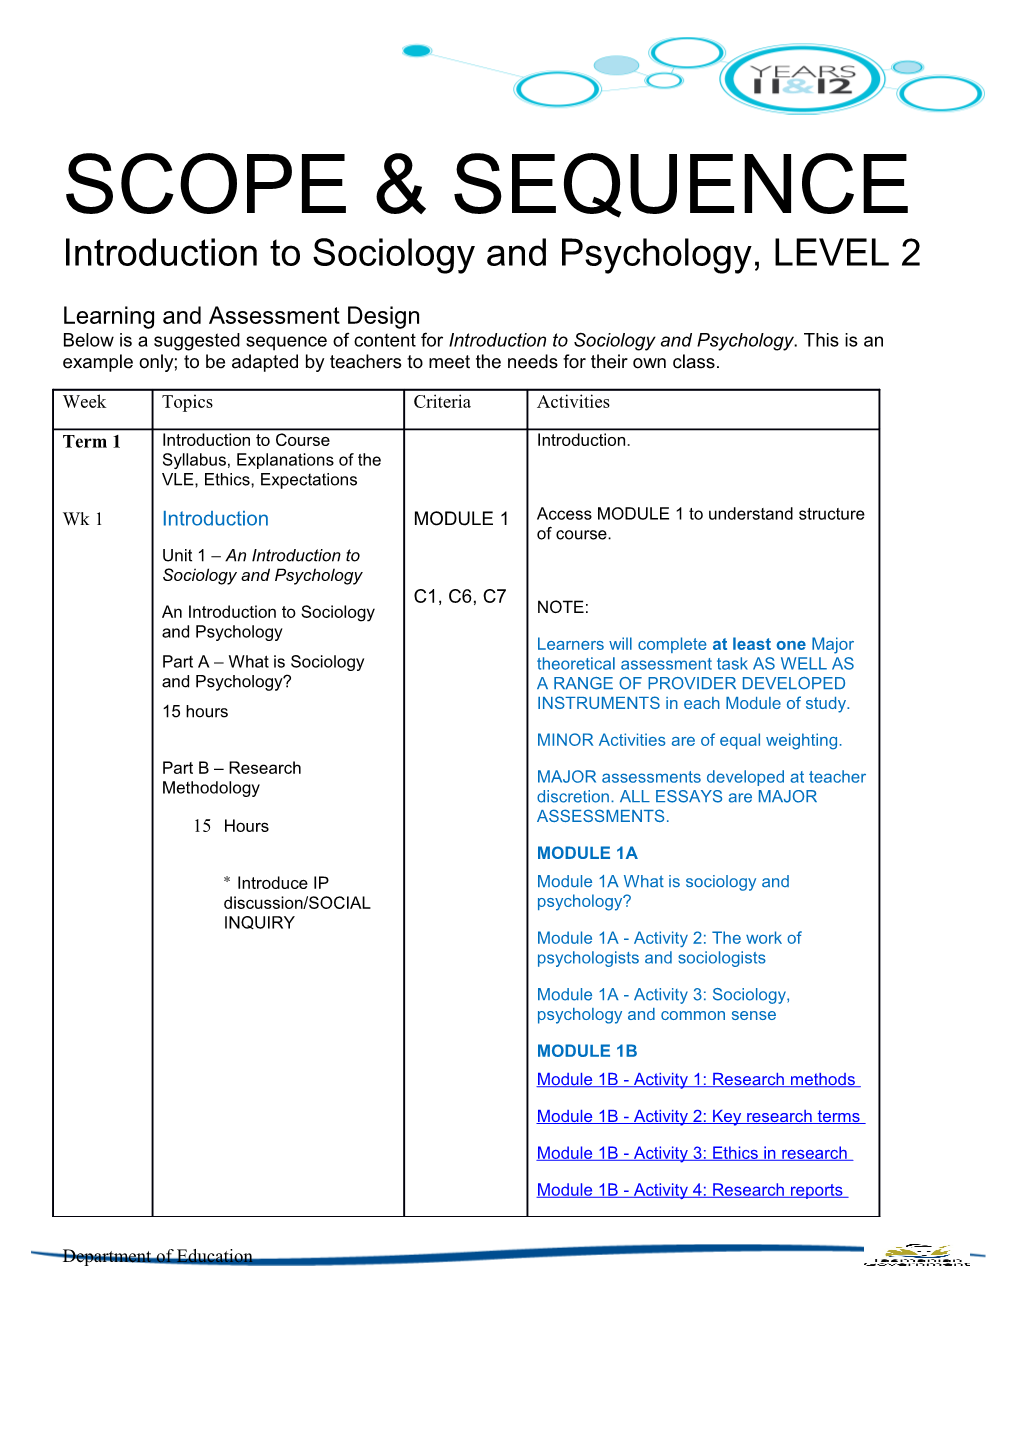 Introduction to Sociology and Psychology, LEVEL 2